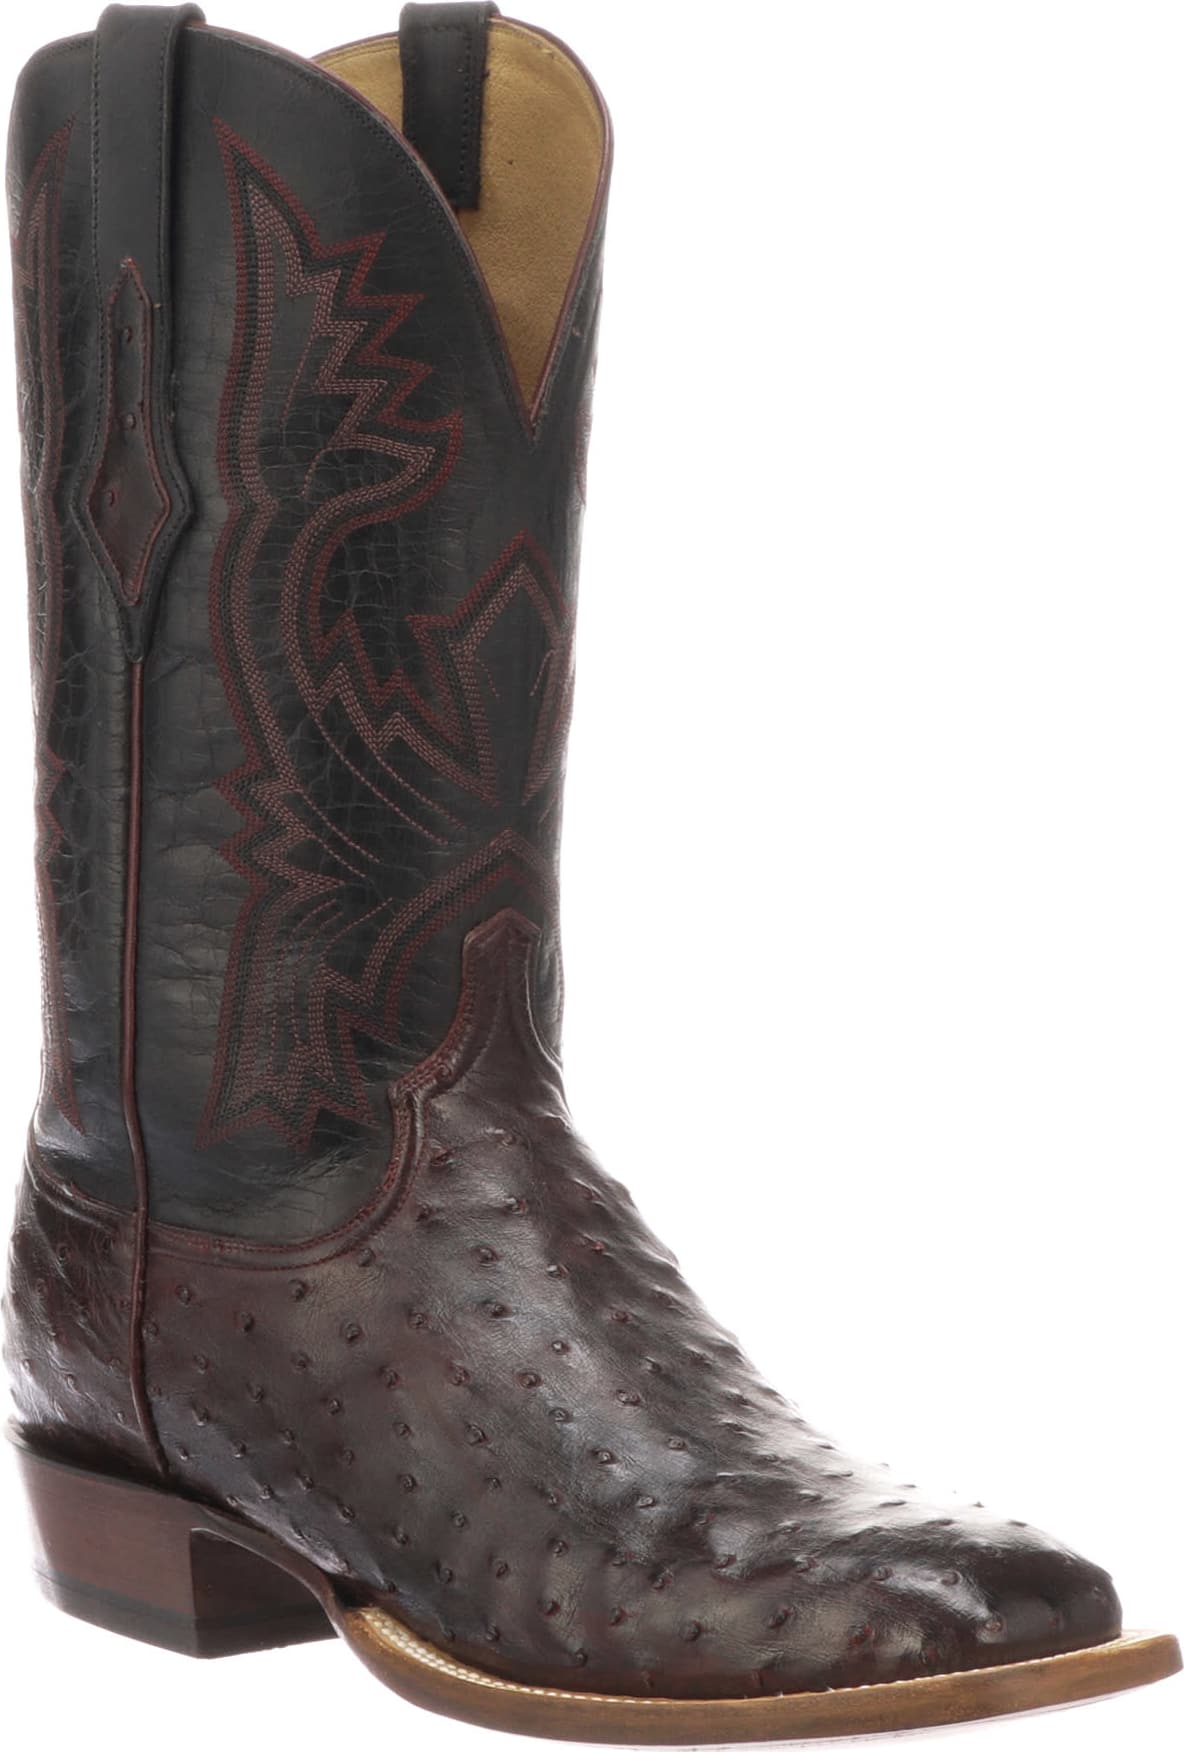 MEN’S LUCCHESE CLIFF - ANTIQUE BLACK CHERRY FULL QUILL OSTRICH BOOTS - El Toro Boots